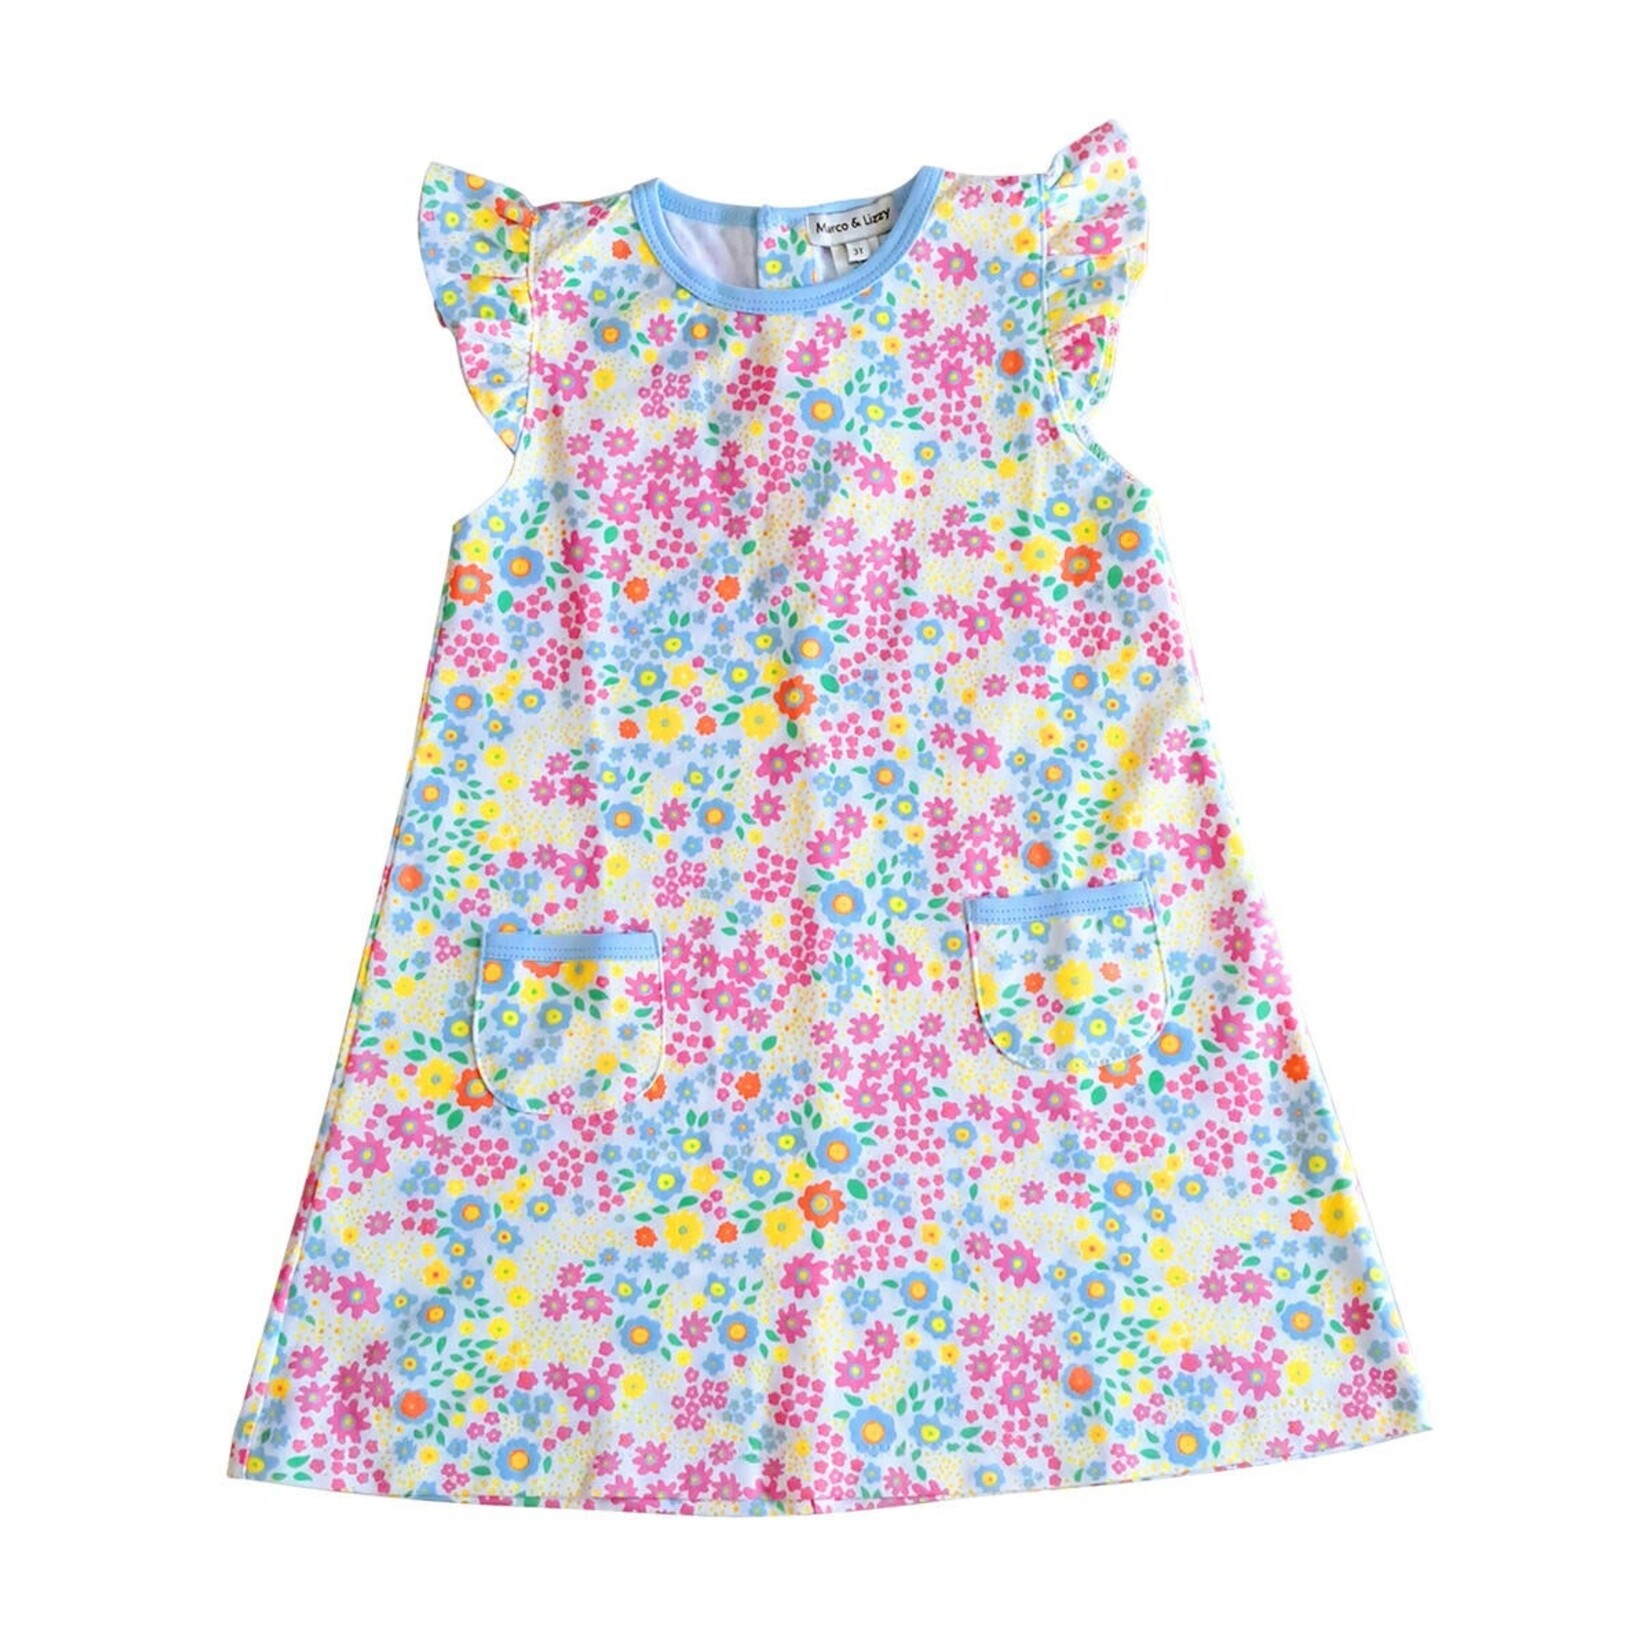 Marco & Lizzy Alison Floral Dress